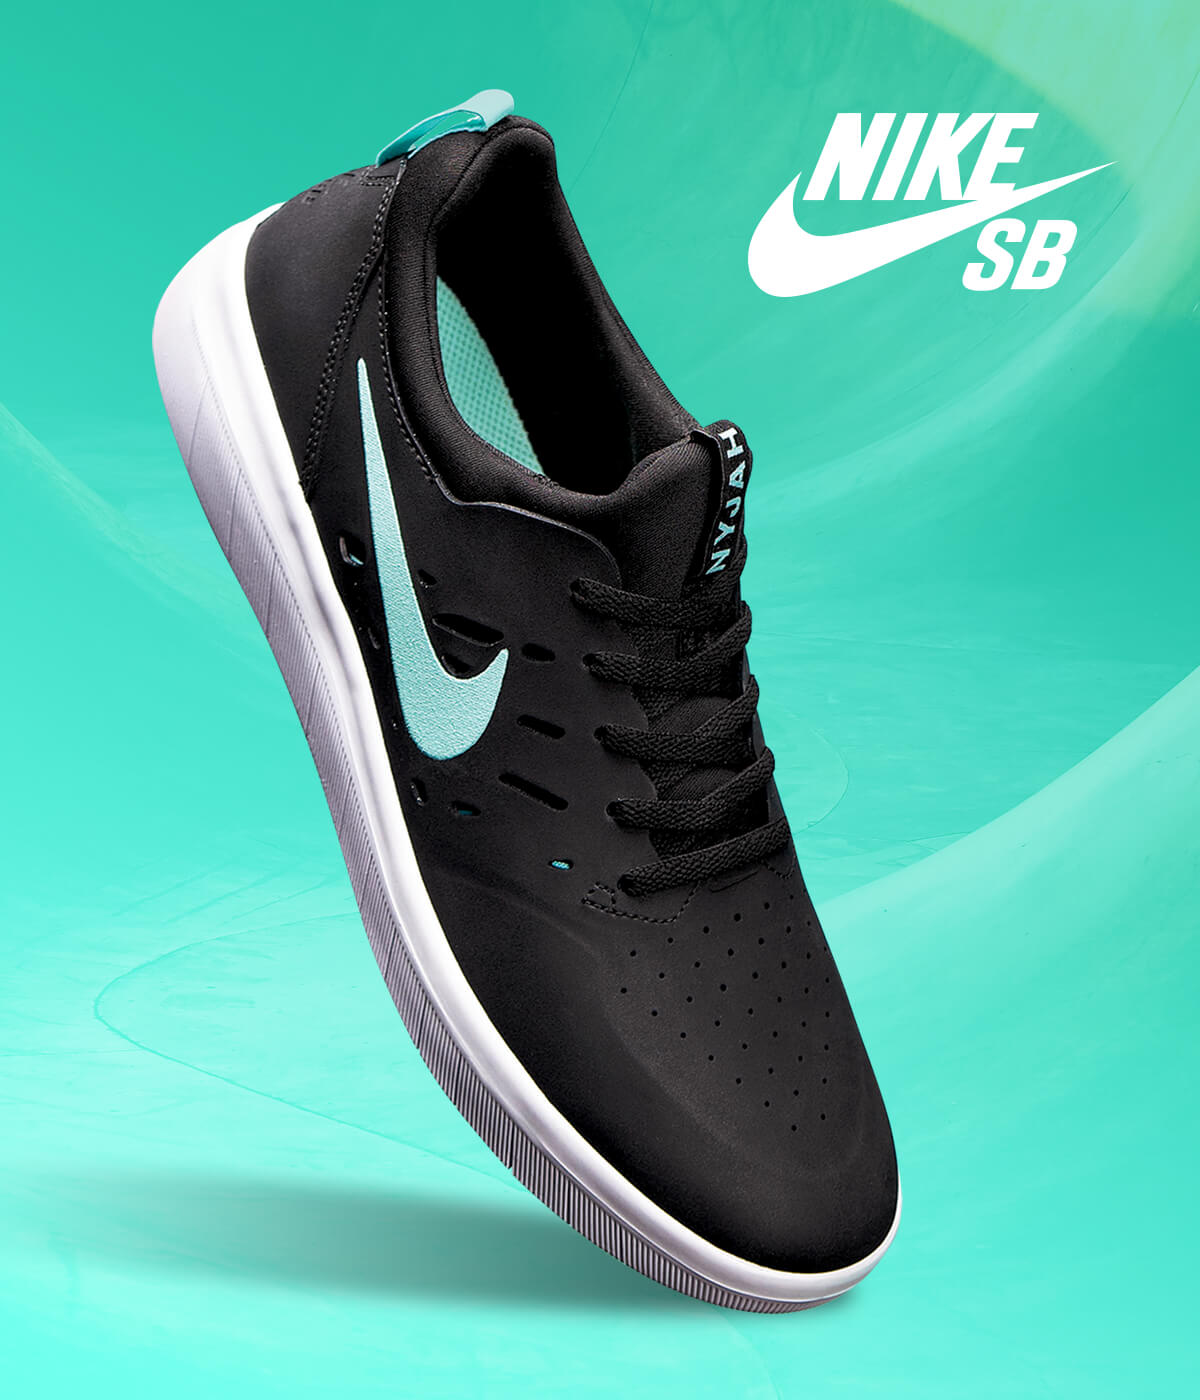 SKATE SHOES FROM NIKE SB & MORE - SHOP SKATE SHOES